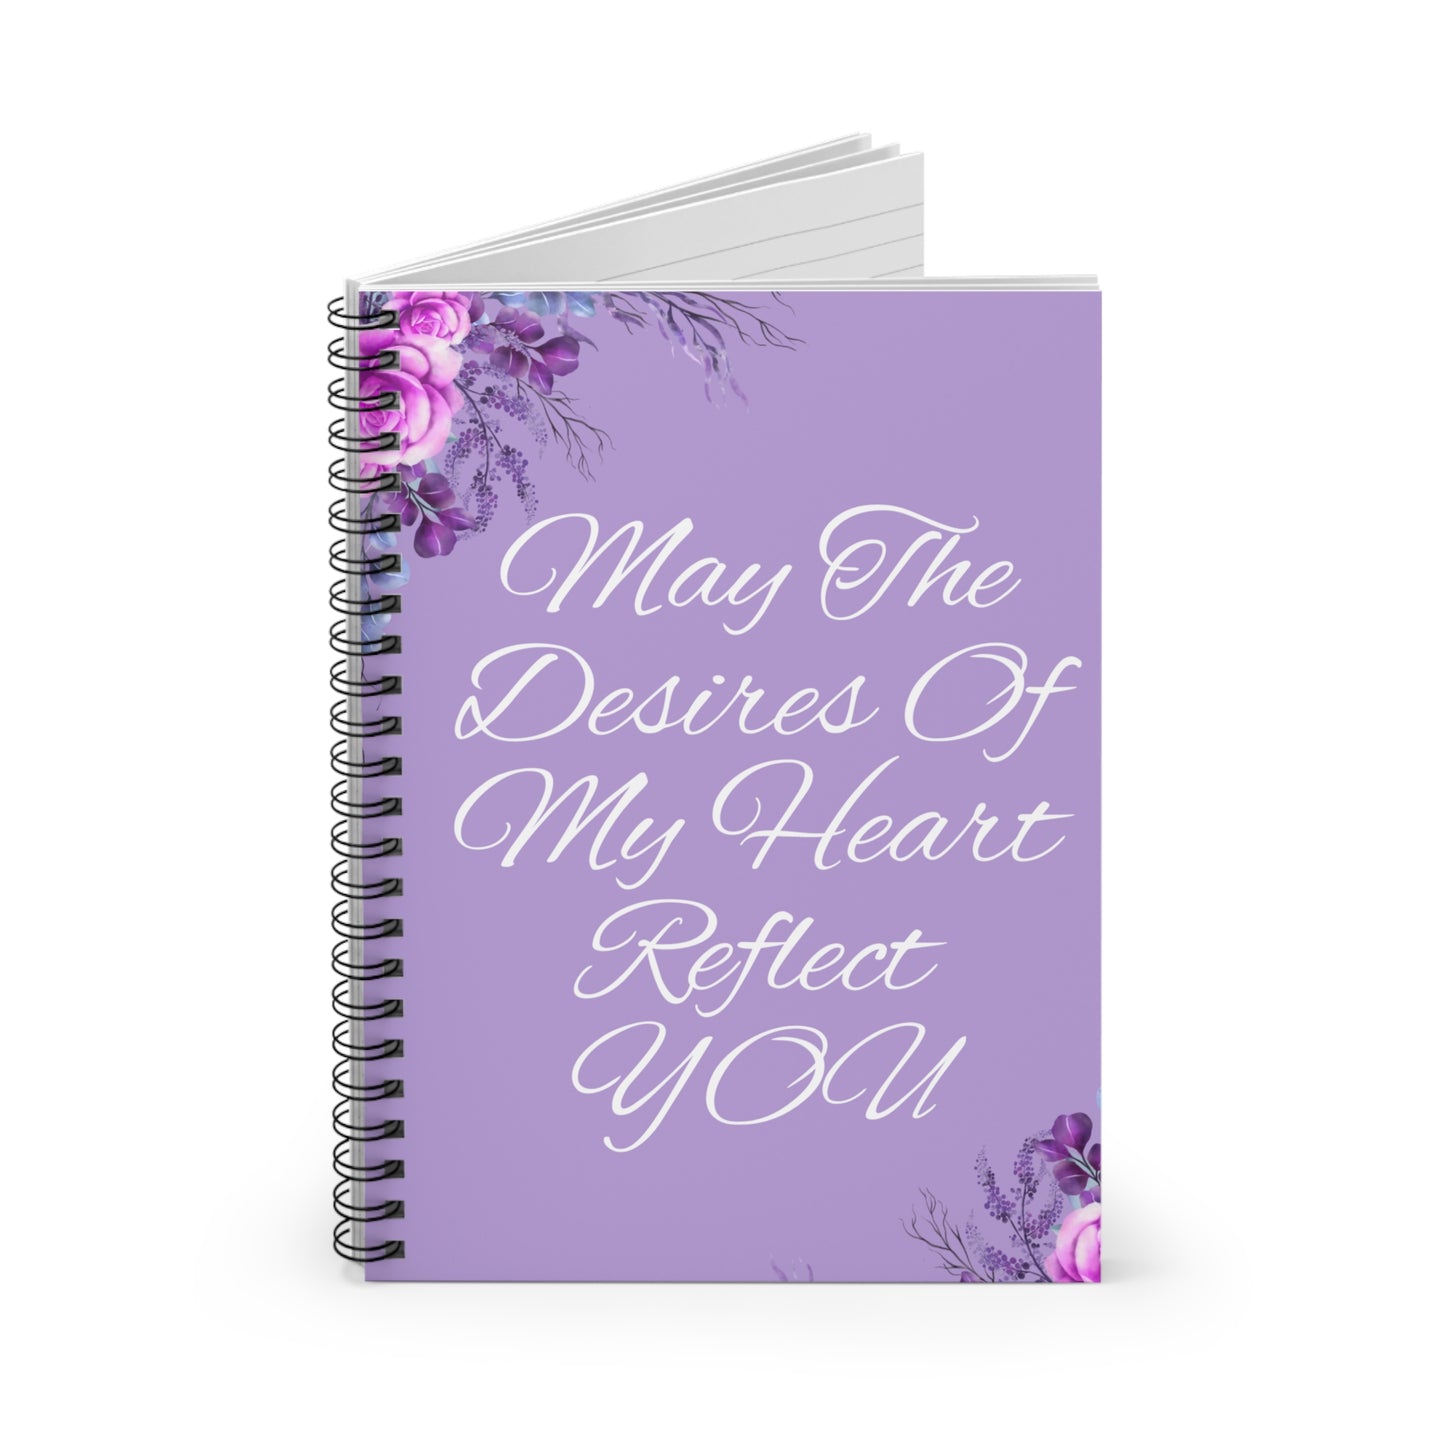 May the Desires of My Heart Reflect You-Spiral Notebook - Ruled Line